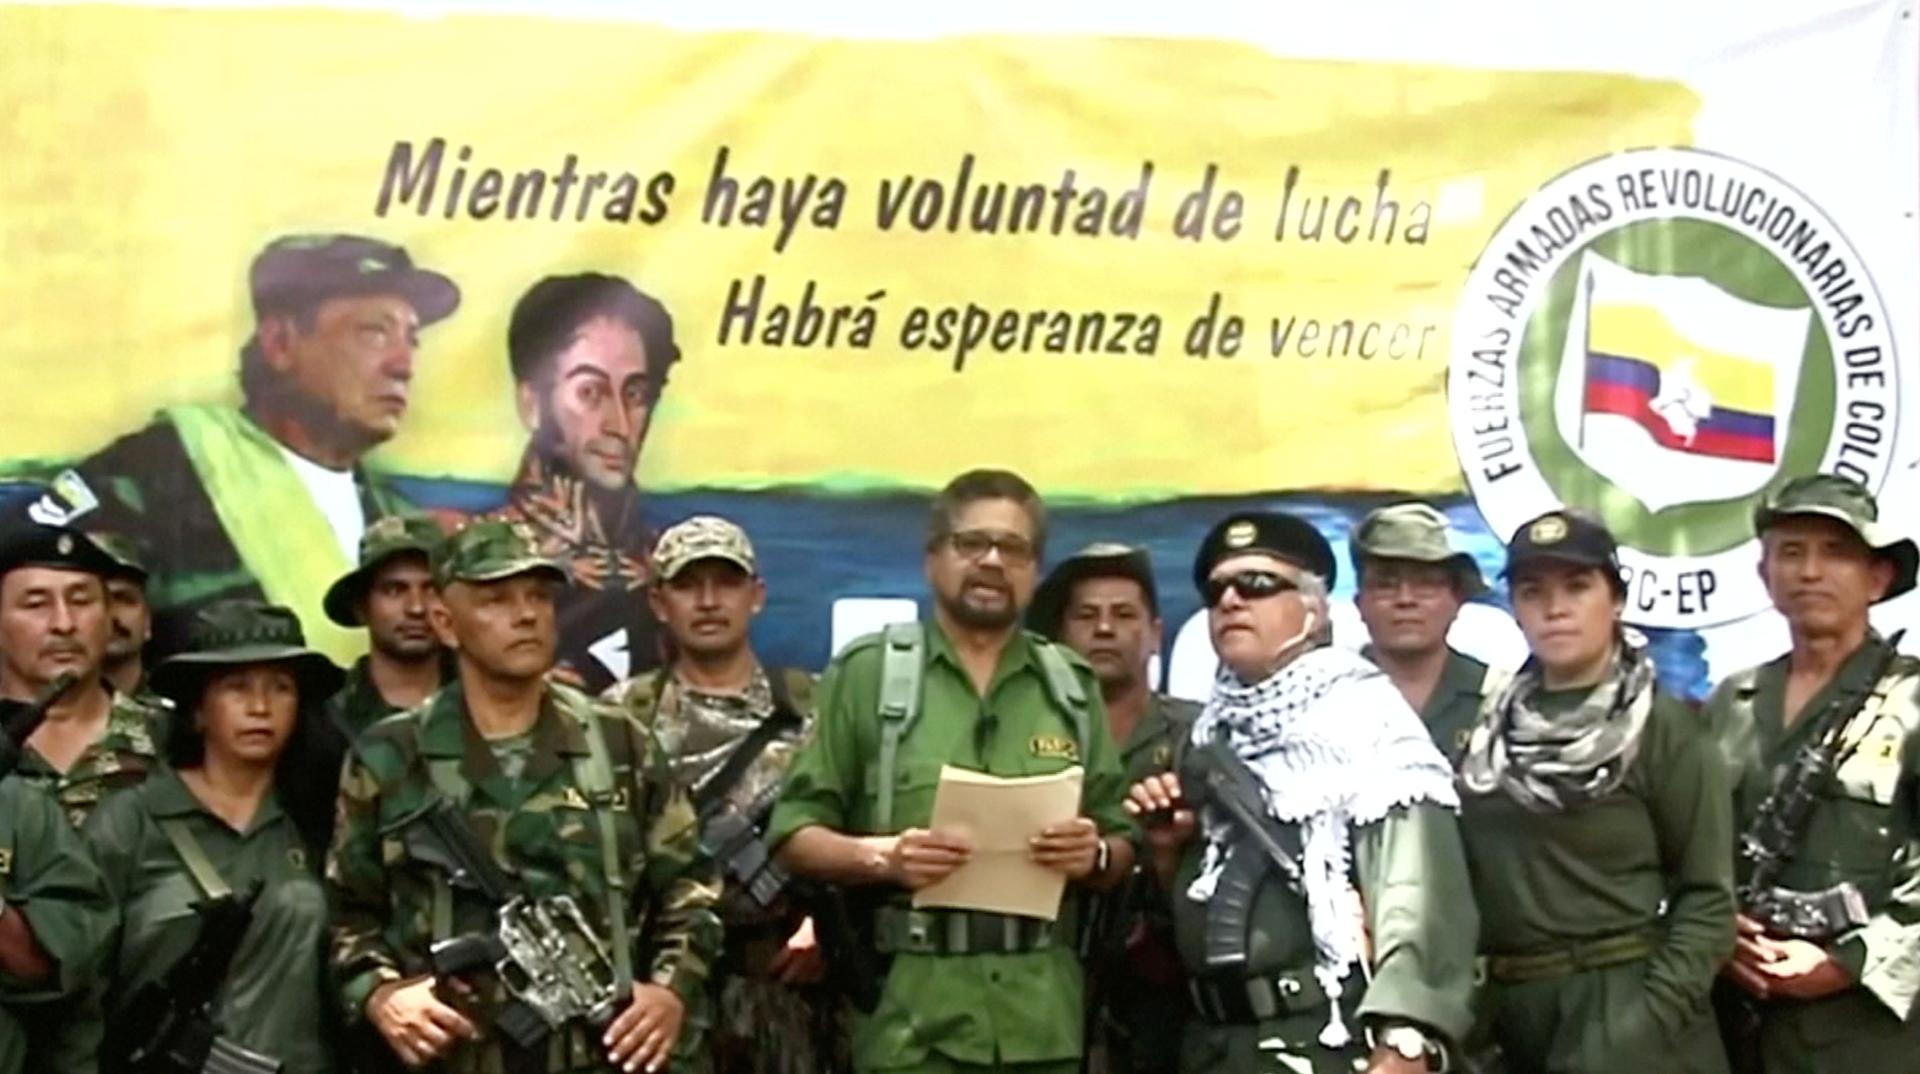 A group of FARC soldiers stand together reading from a paper. 